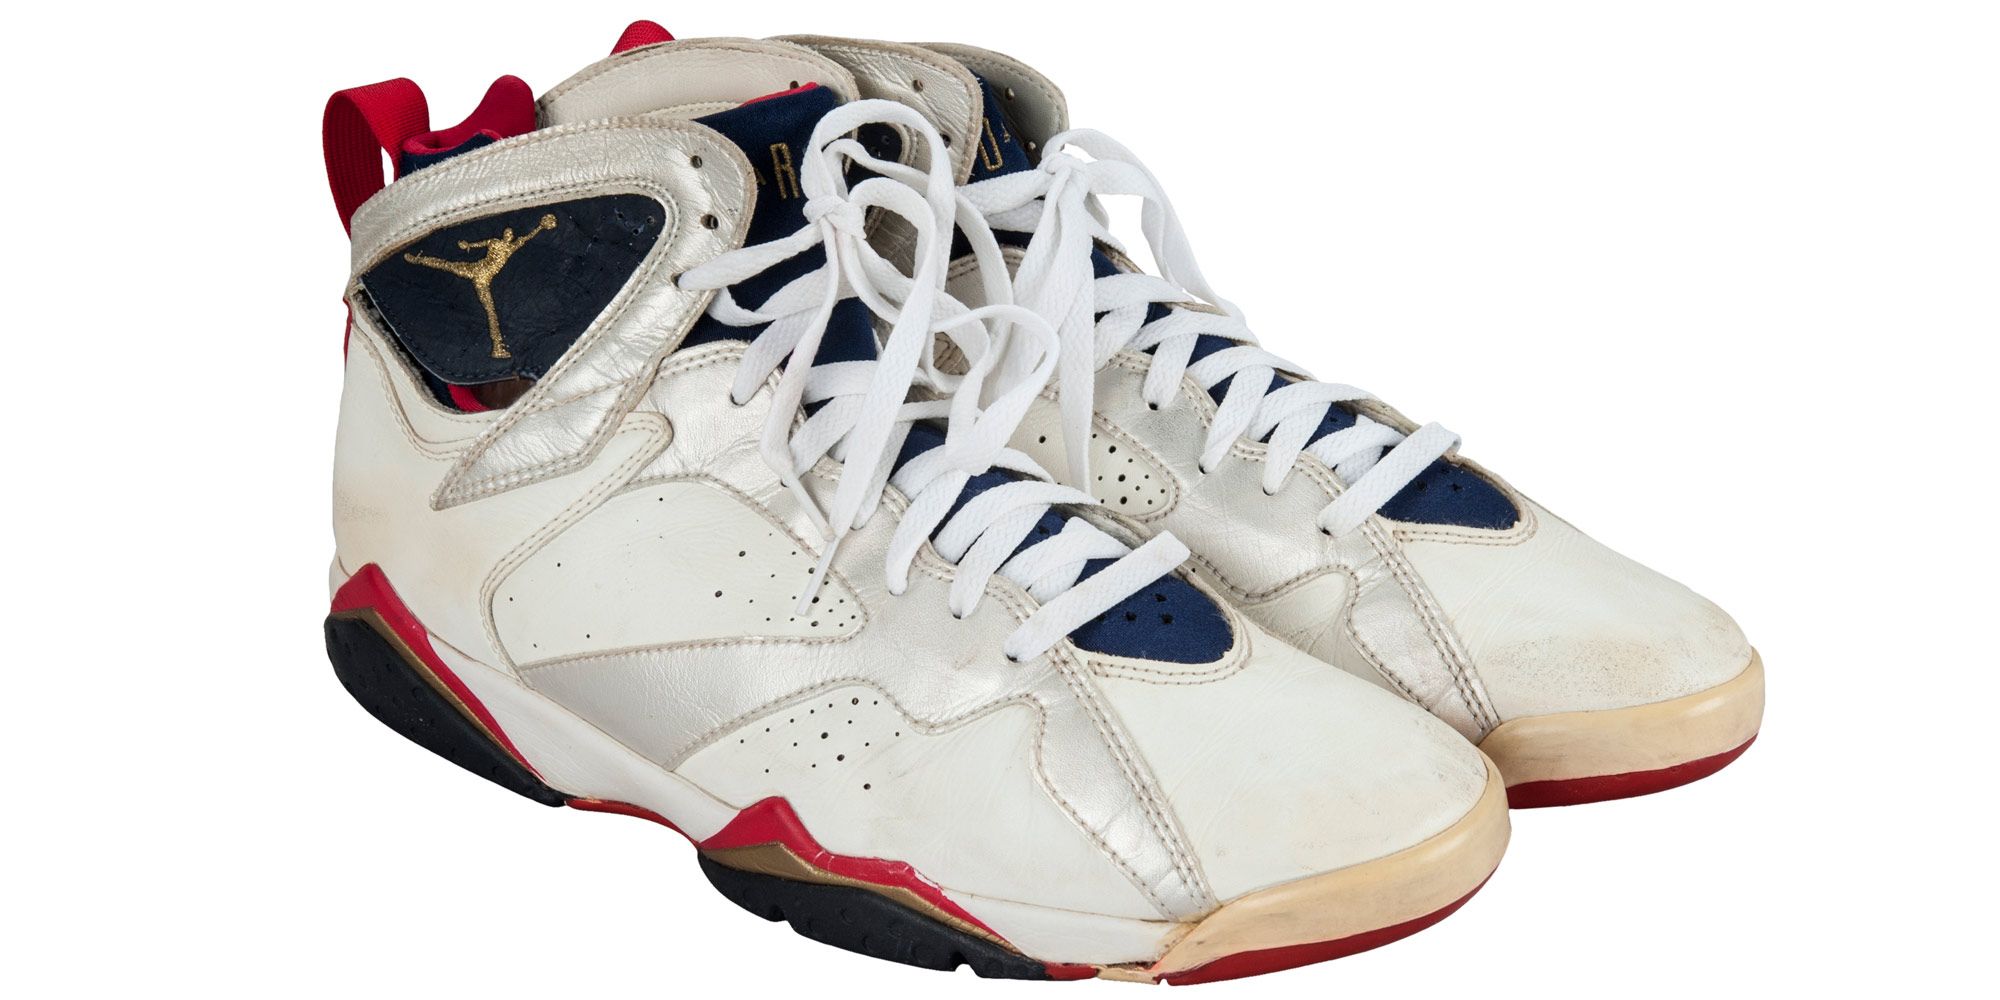 Michael Jordan's Nikes From the '92 Olympics Team Are For